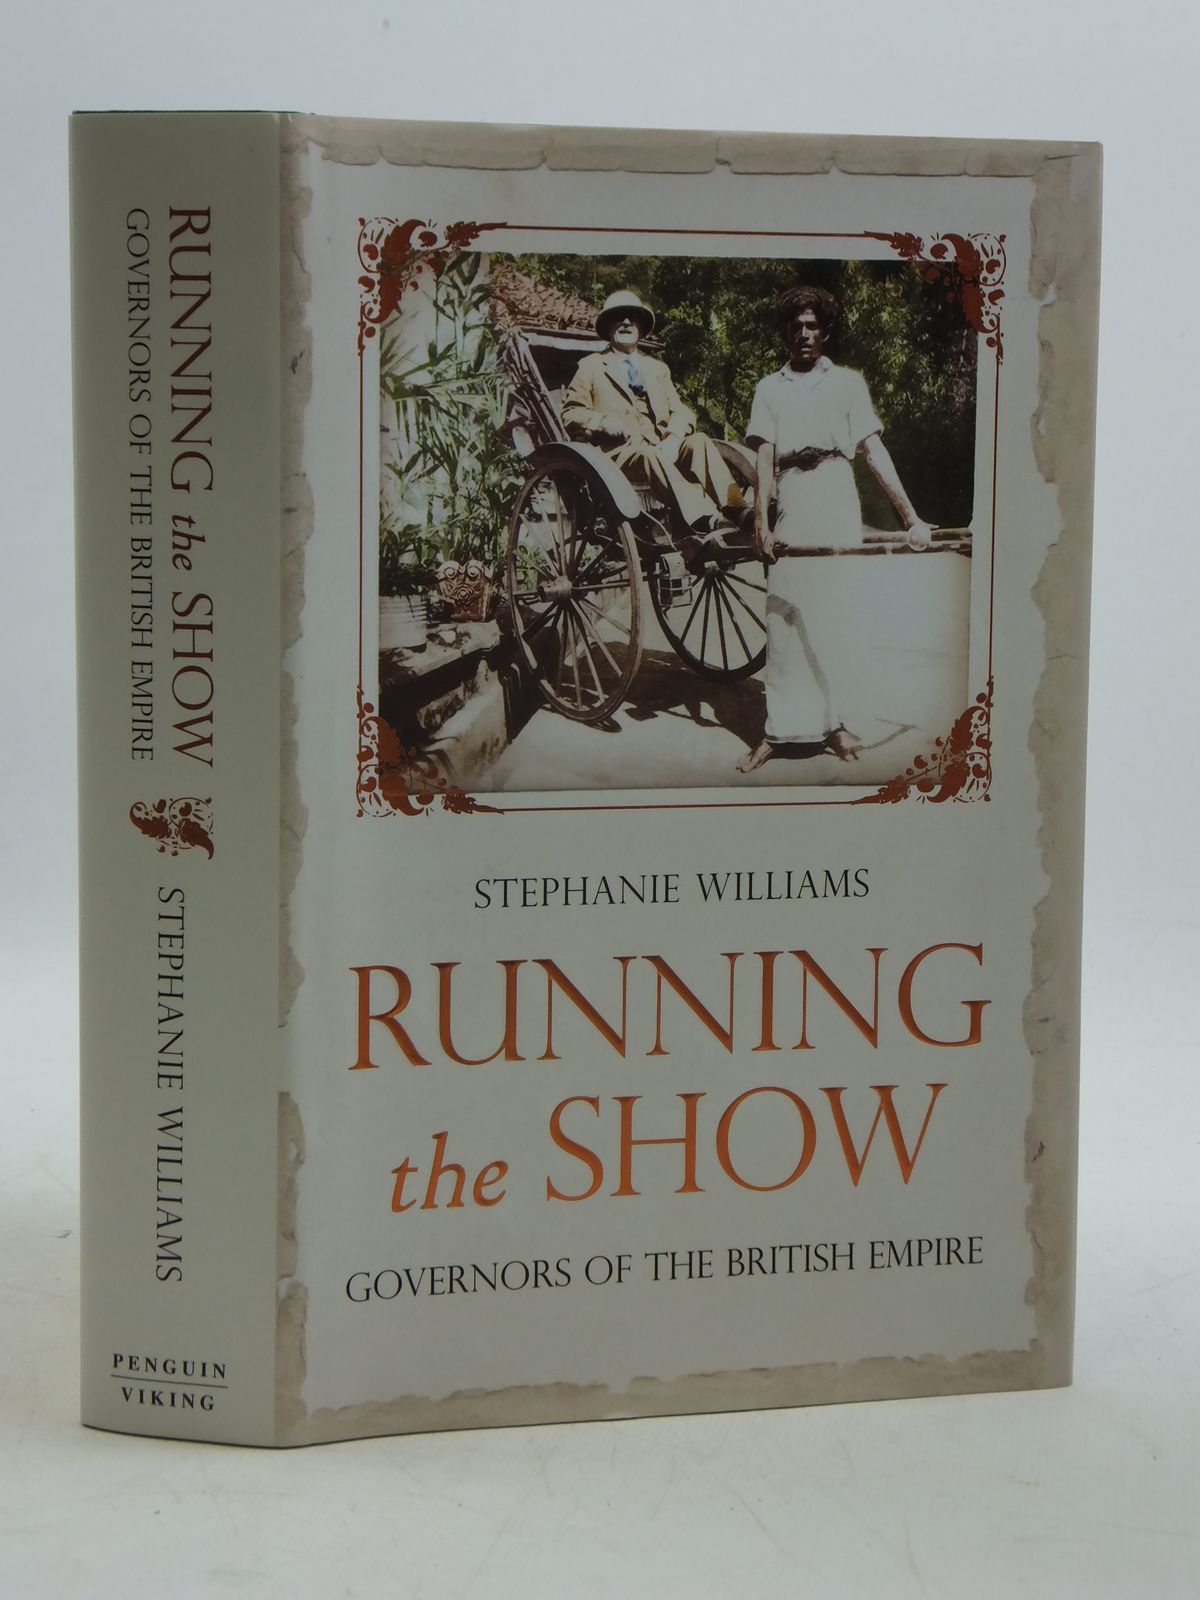 Photo of RUNNING THE SHOW GOVERNORS OF THE BRITISH EMPIRE written by Williams, Stephanie published by Viking (STOCK CODE: 2110719)  for sale by Stella & Rose's Books